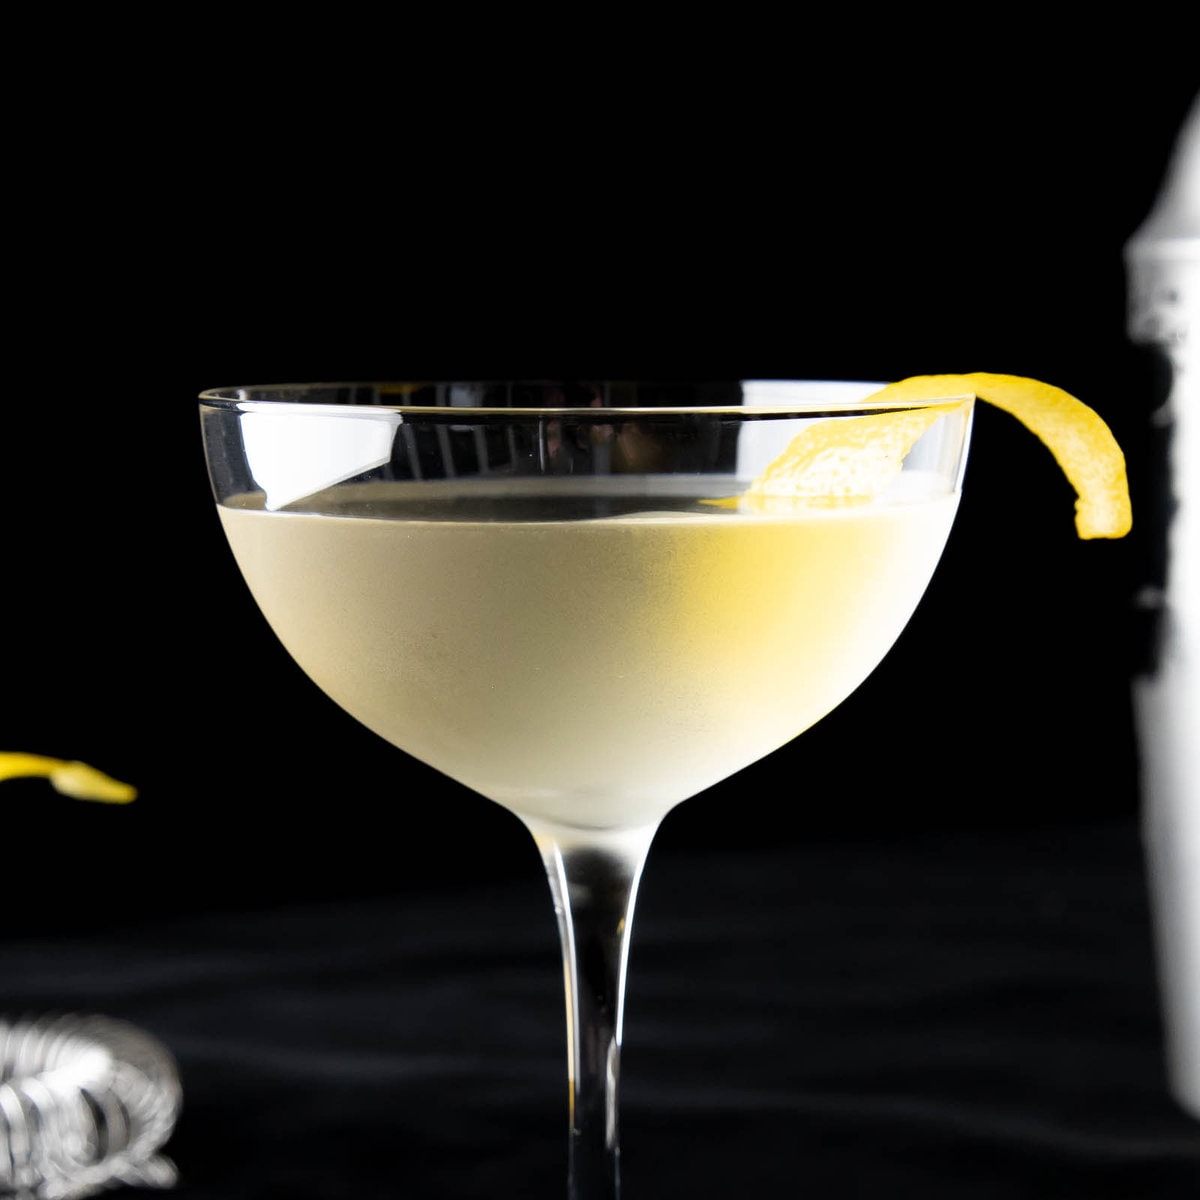 50/50 martini served in a coupe glass with a lemon garnish on a black backdrop